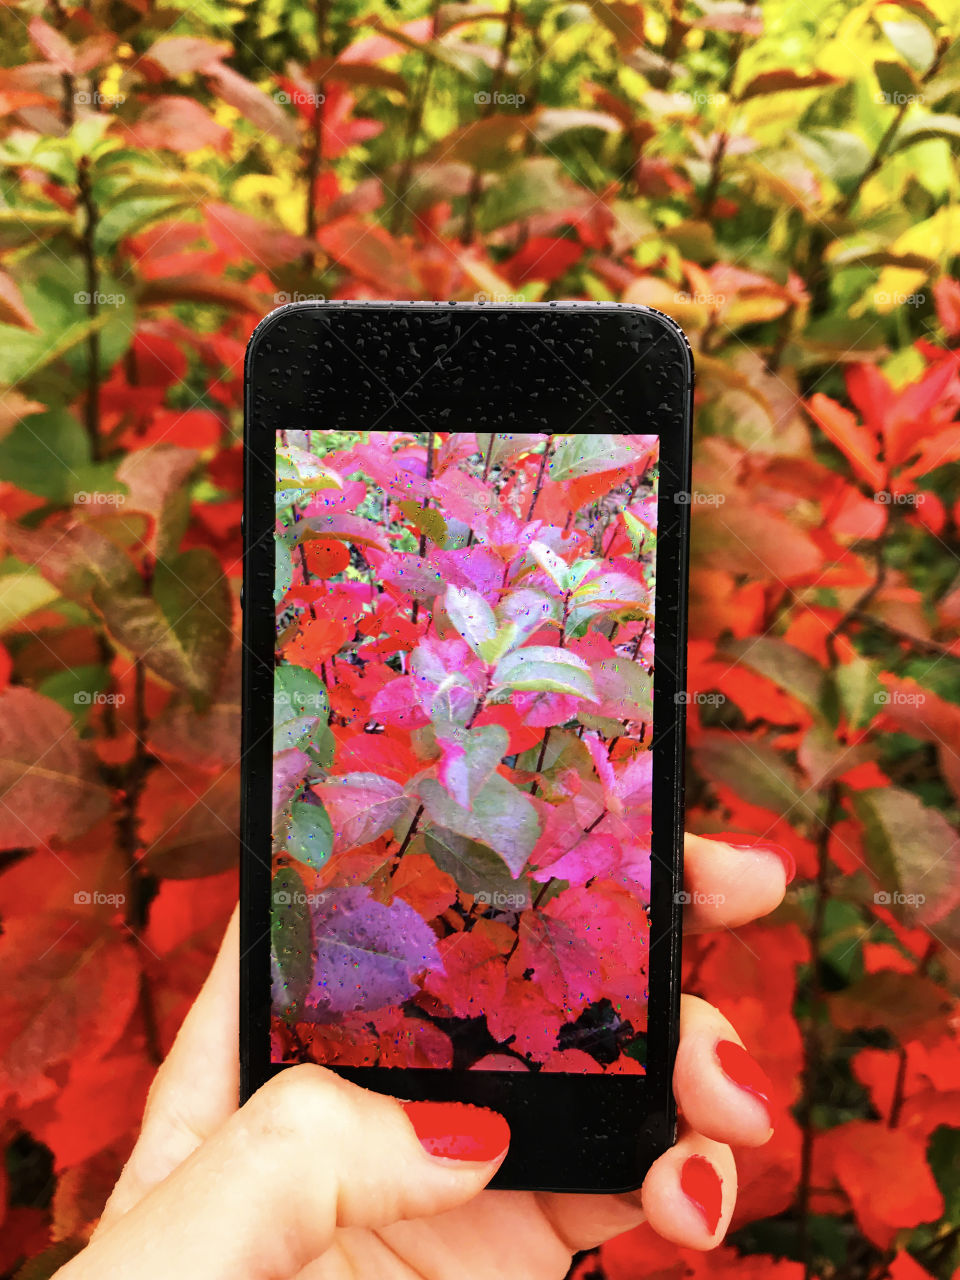 Female hand holding a mobile phone and taking a photo of autumn leaves under the rain 